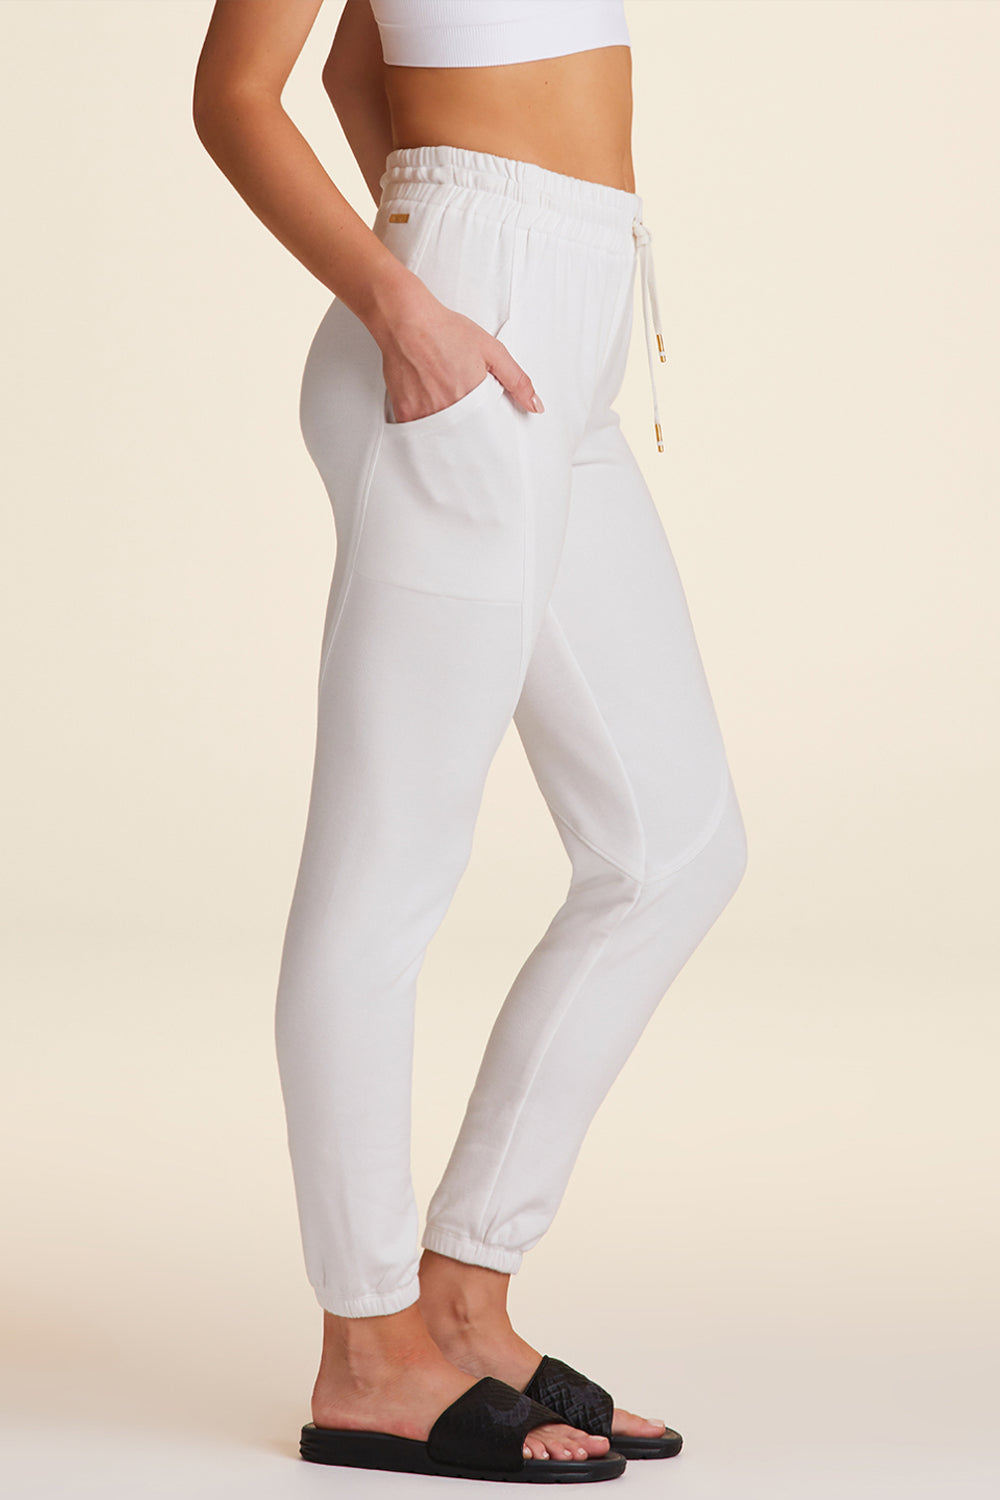 Side view of Alala Luxury Women's Athleisure super crewneck fleece sweatpant in white with pockets